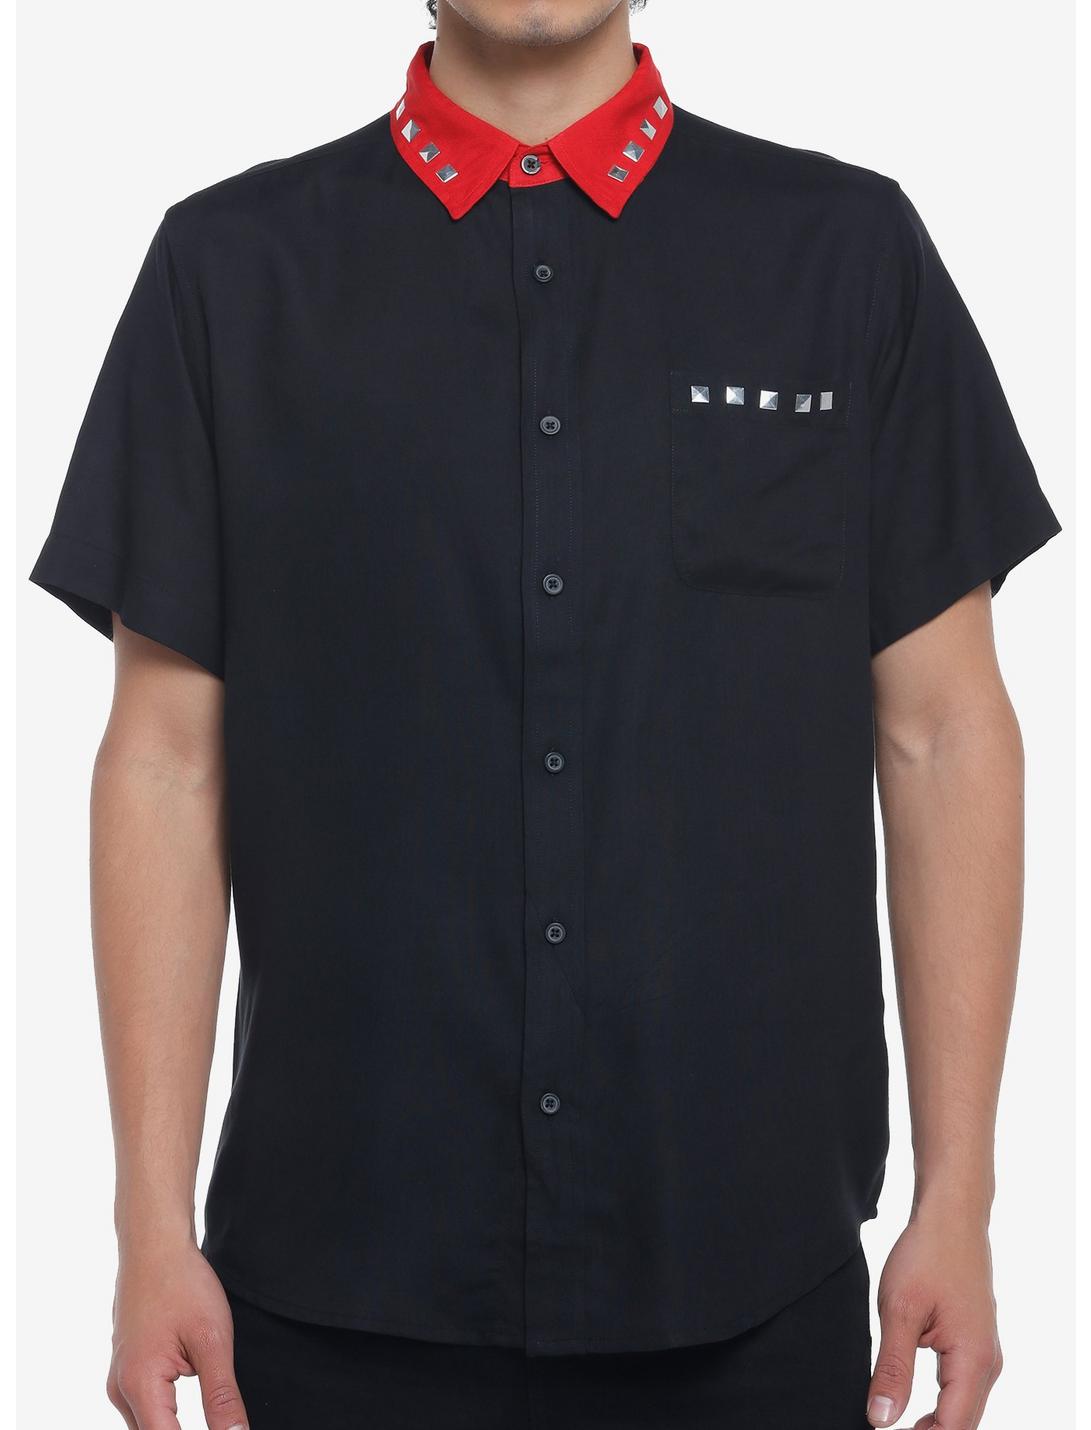 Red Collar Pyramid Stud Collar Woven Button-Up, BLACK, hi-res